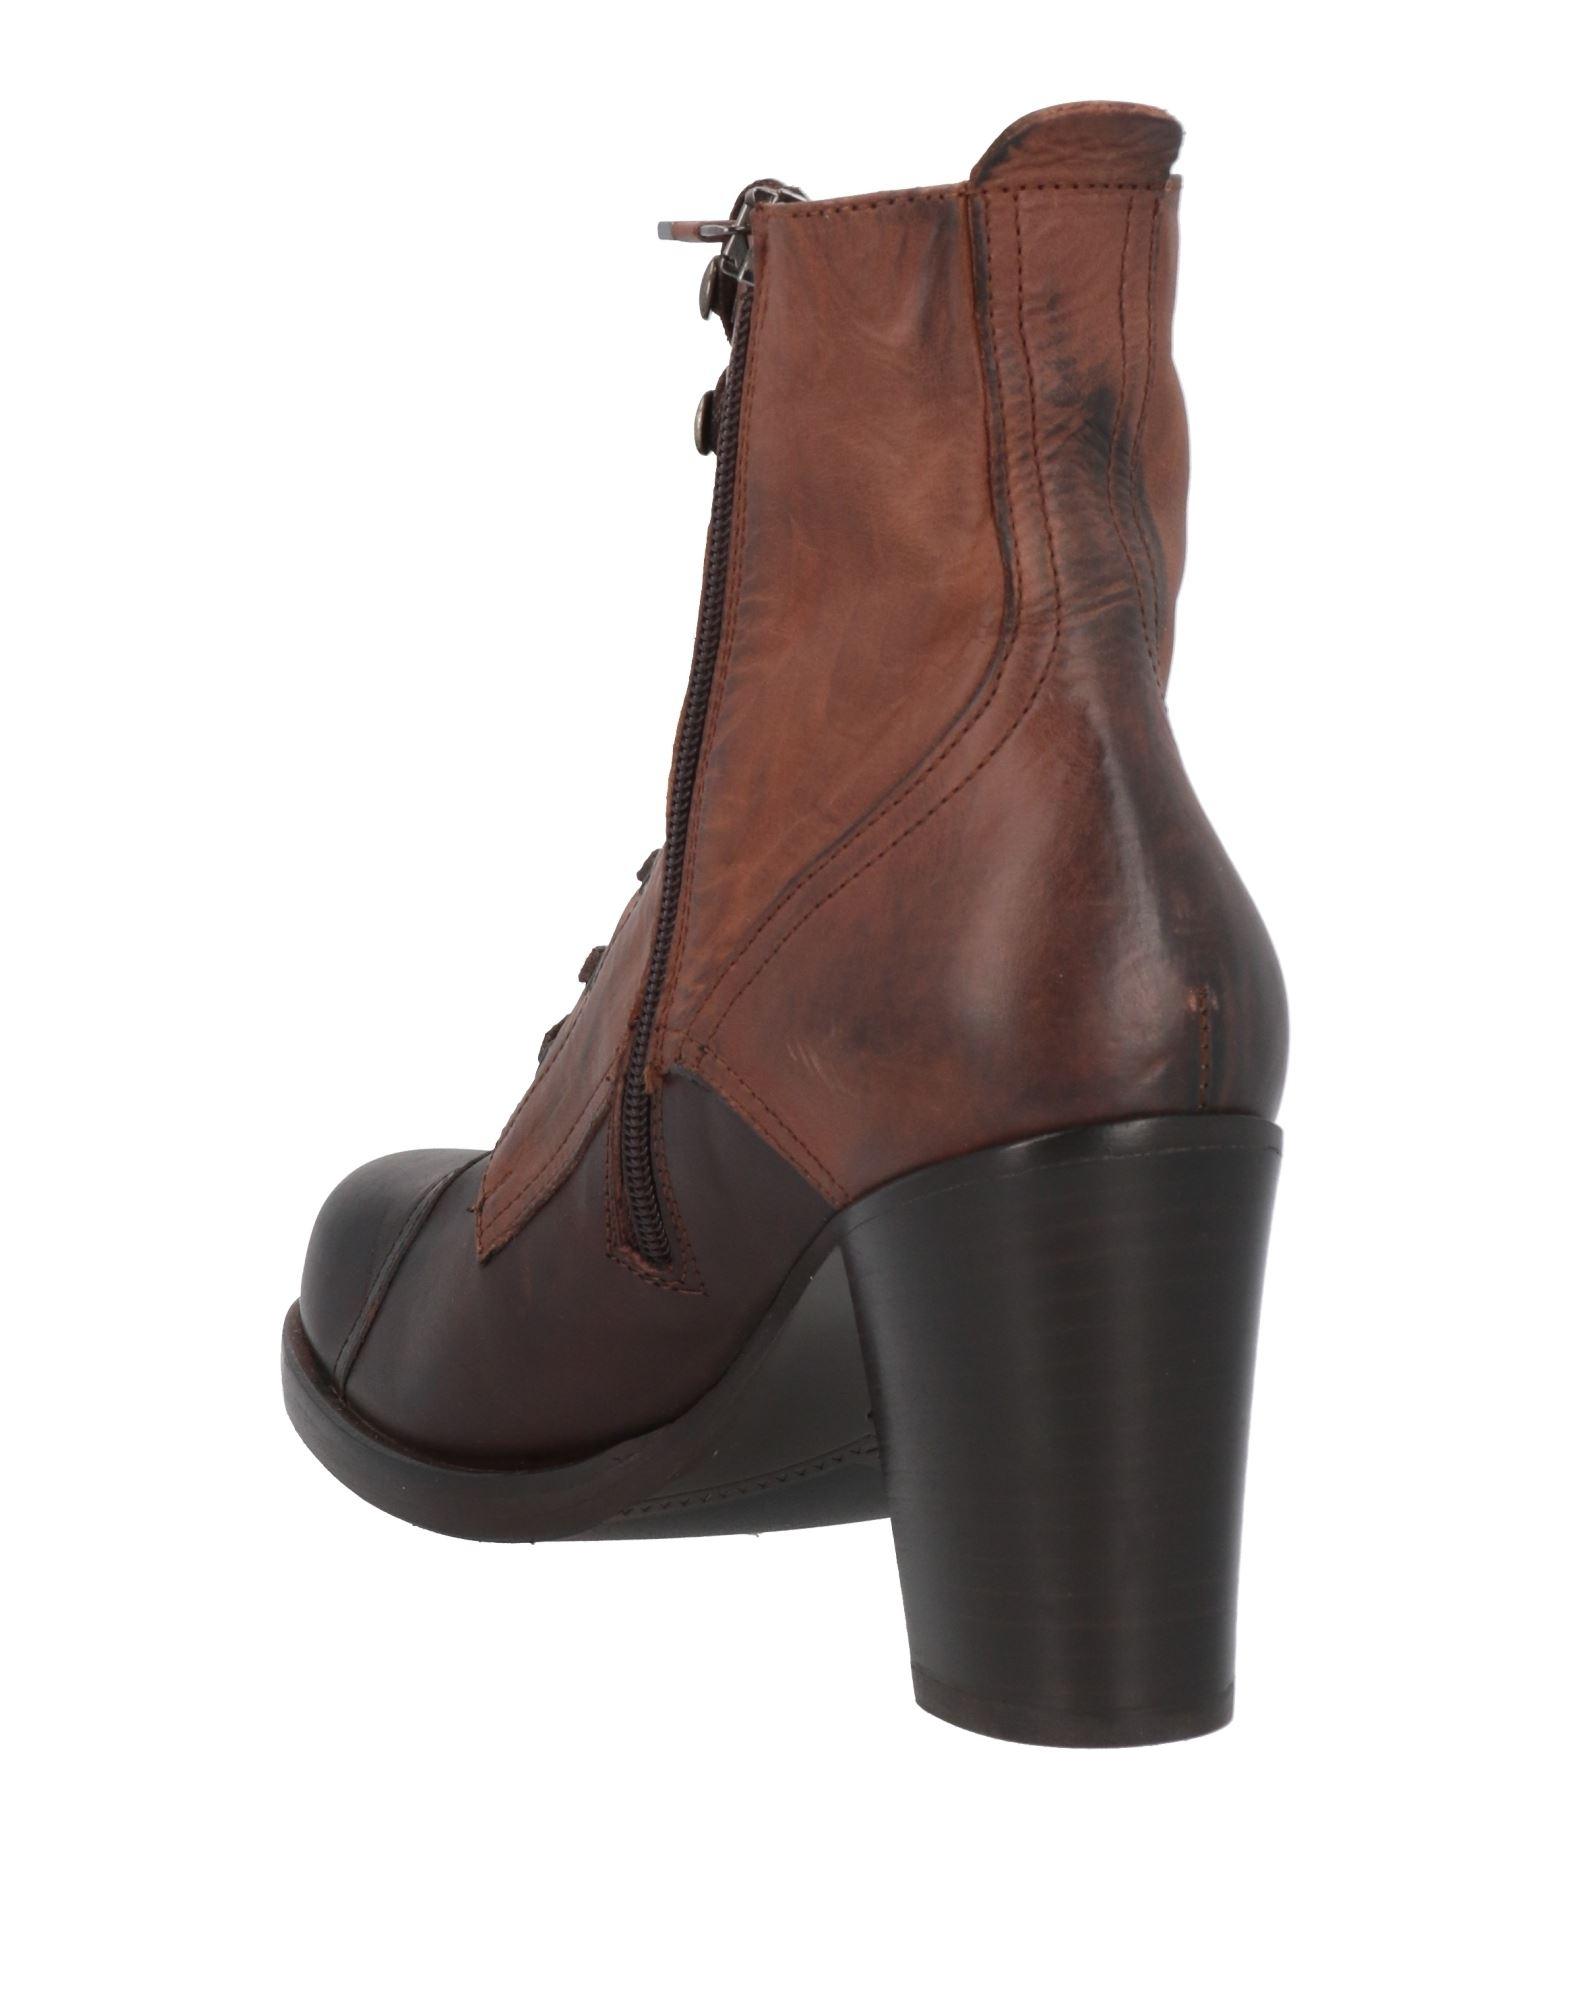 Slagter henvise Isse Alberto Fermani Ankle Boots in Brown | Lyst